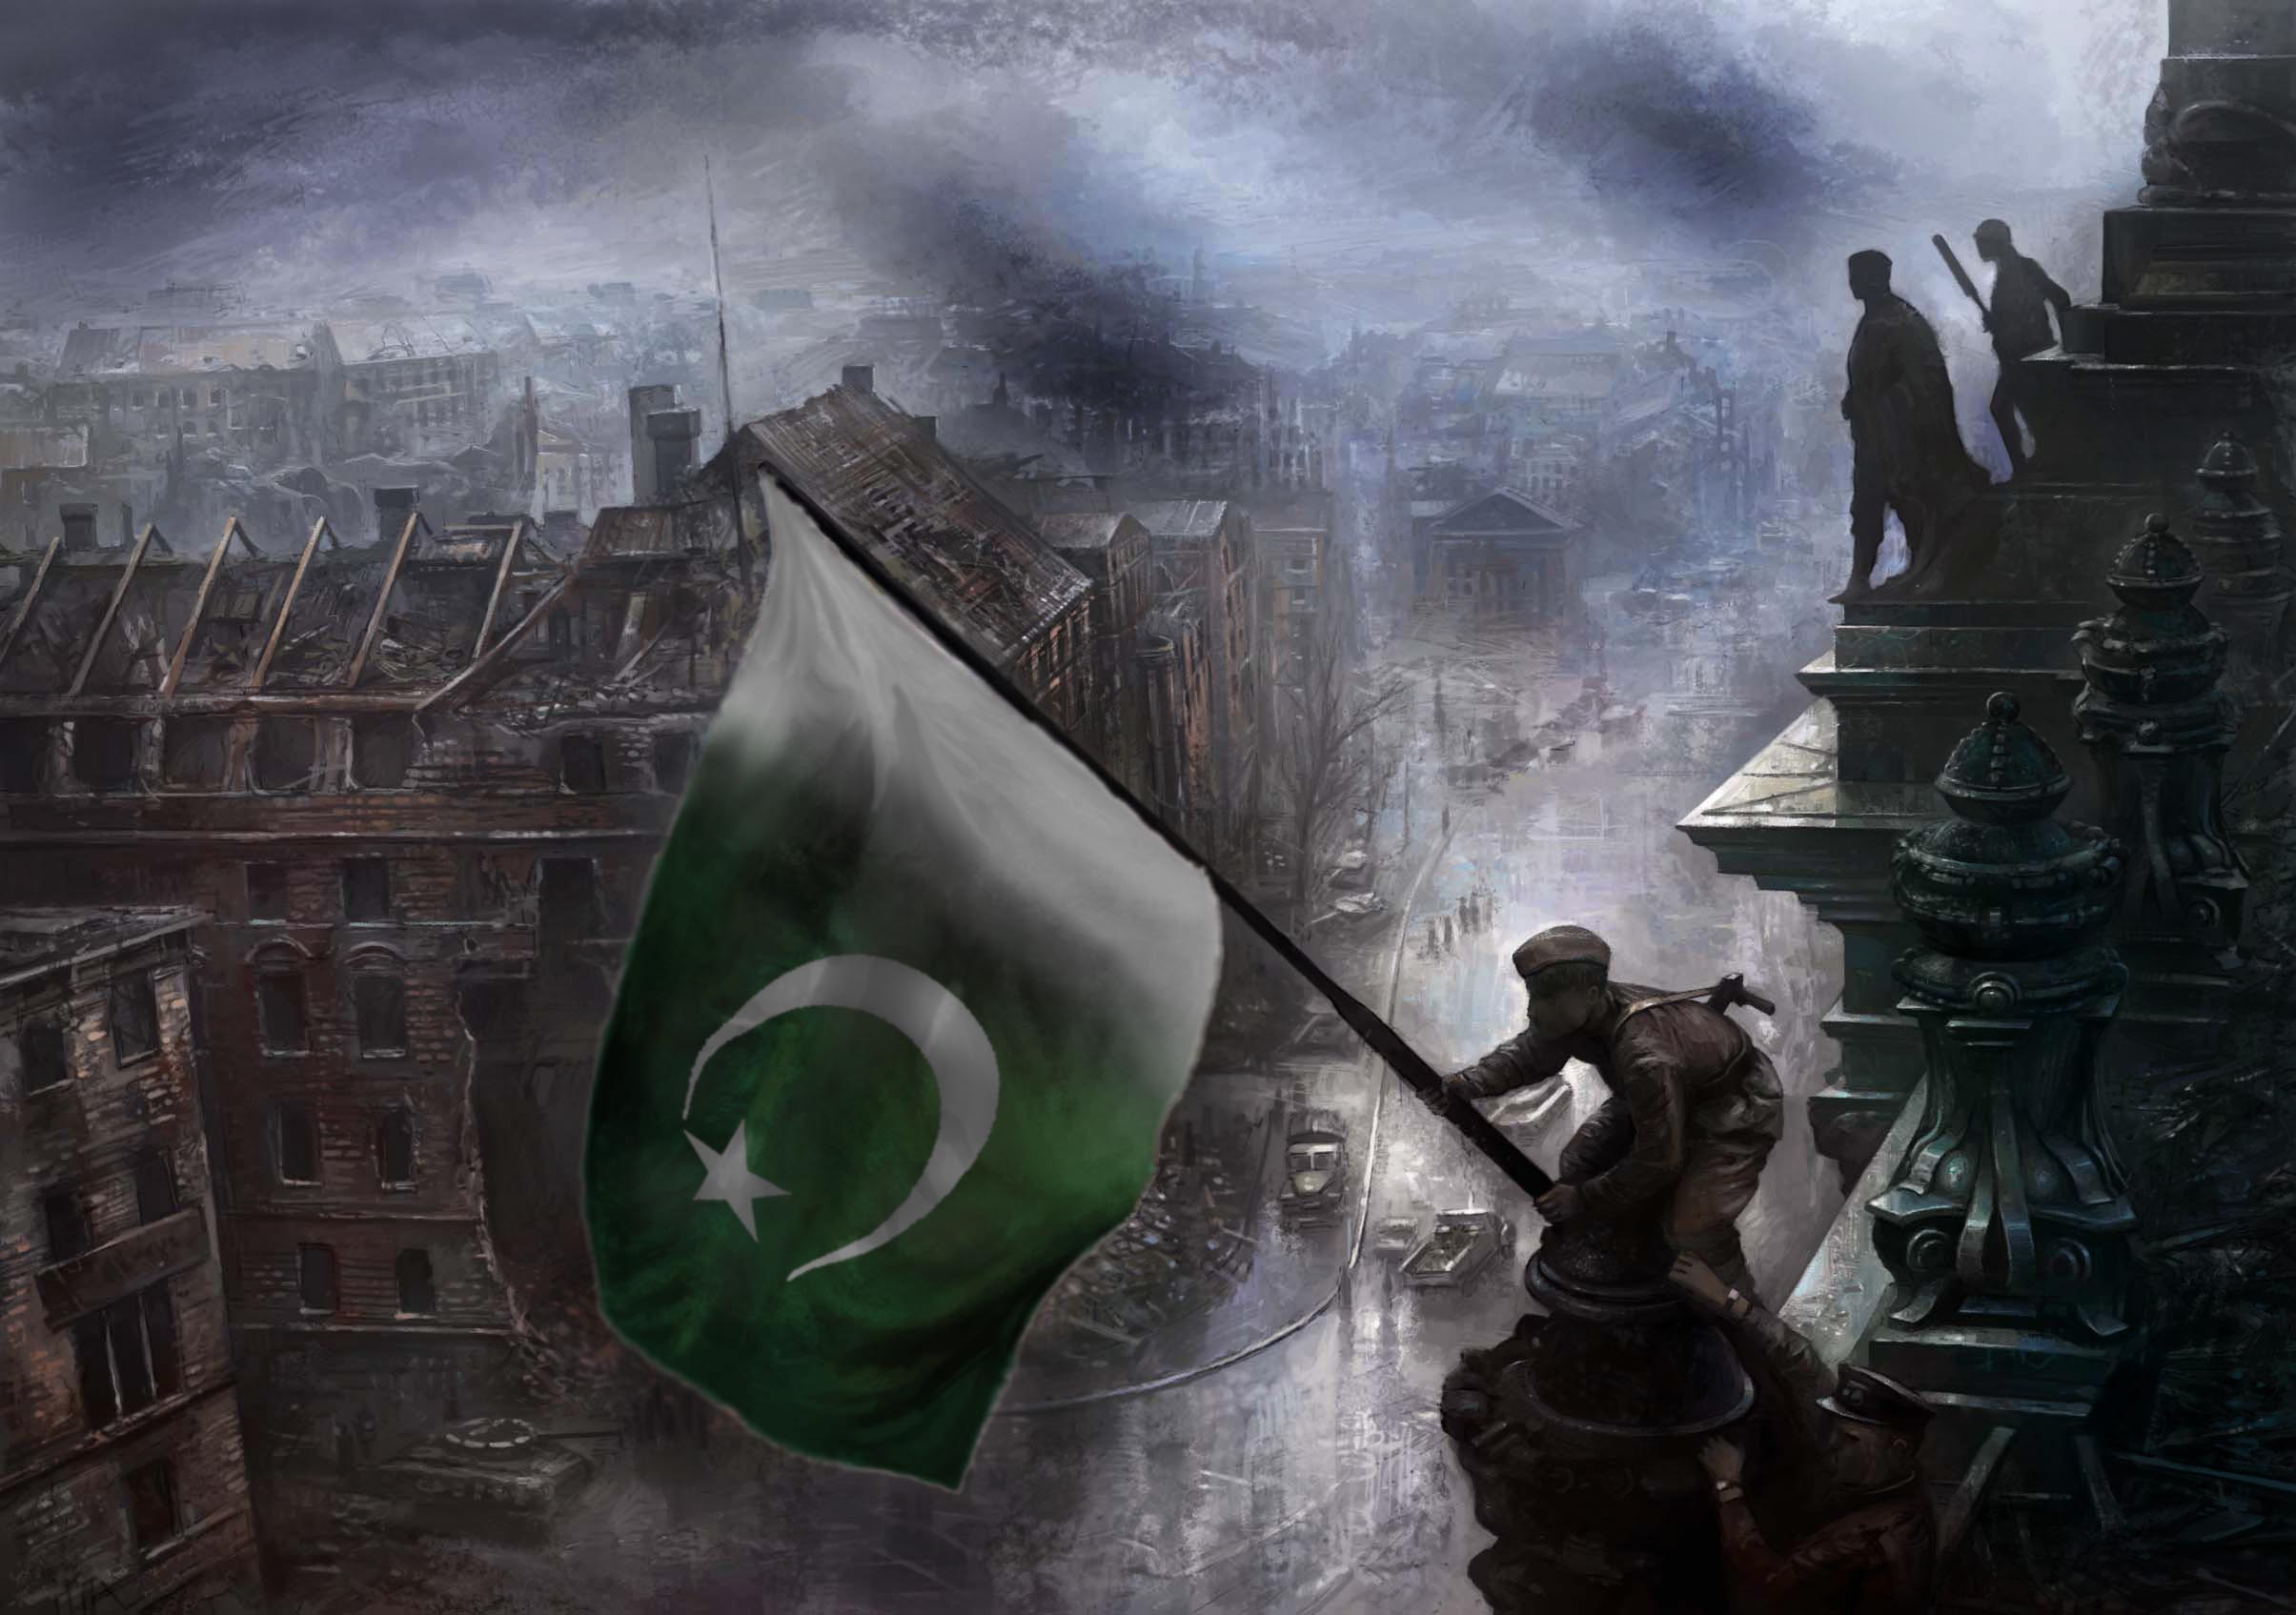 Flag of our fathers - Pakistan